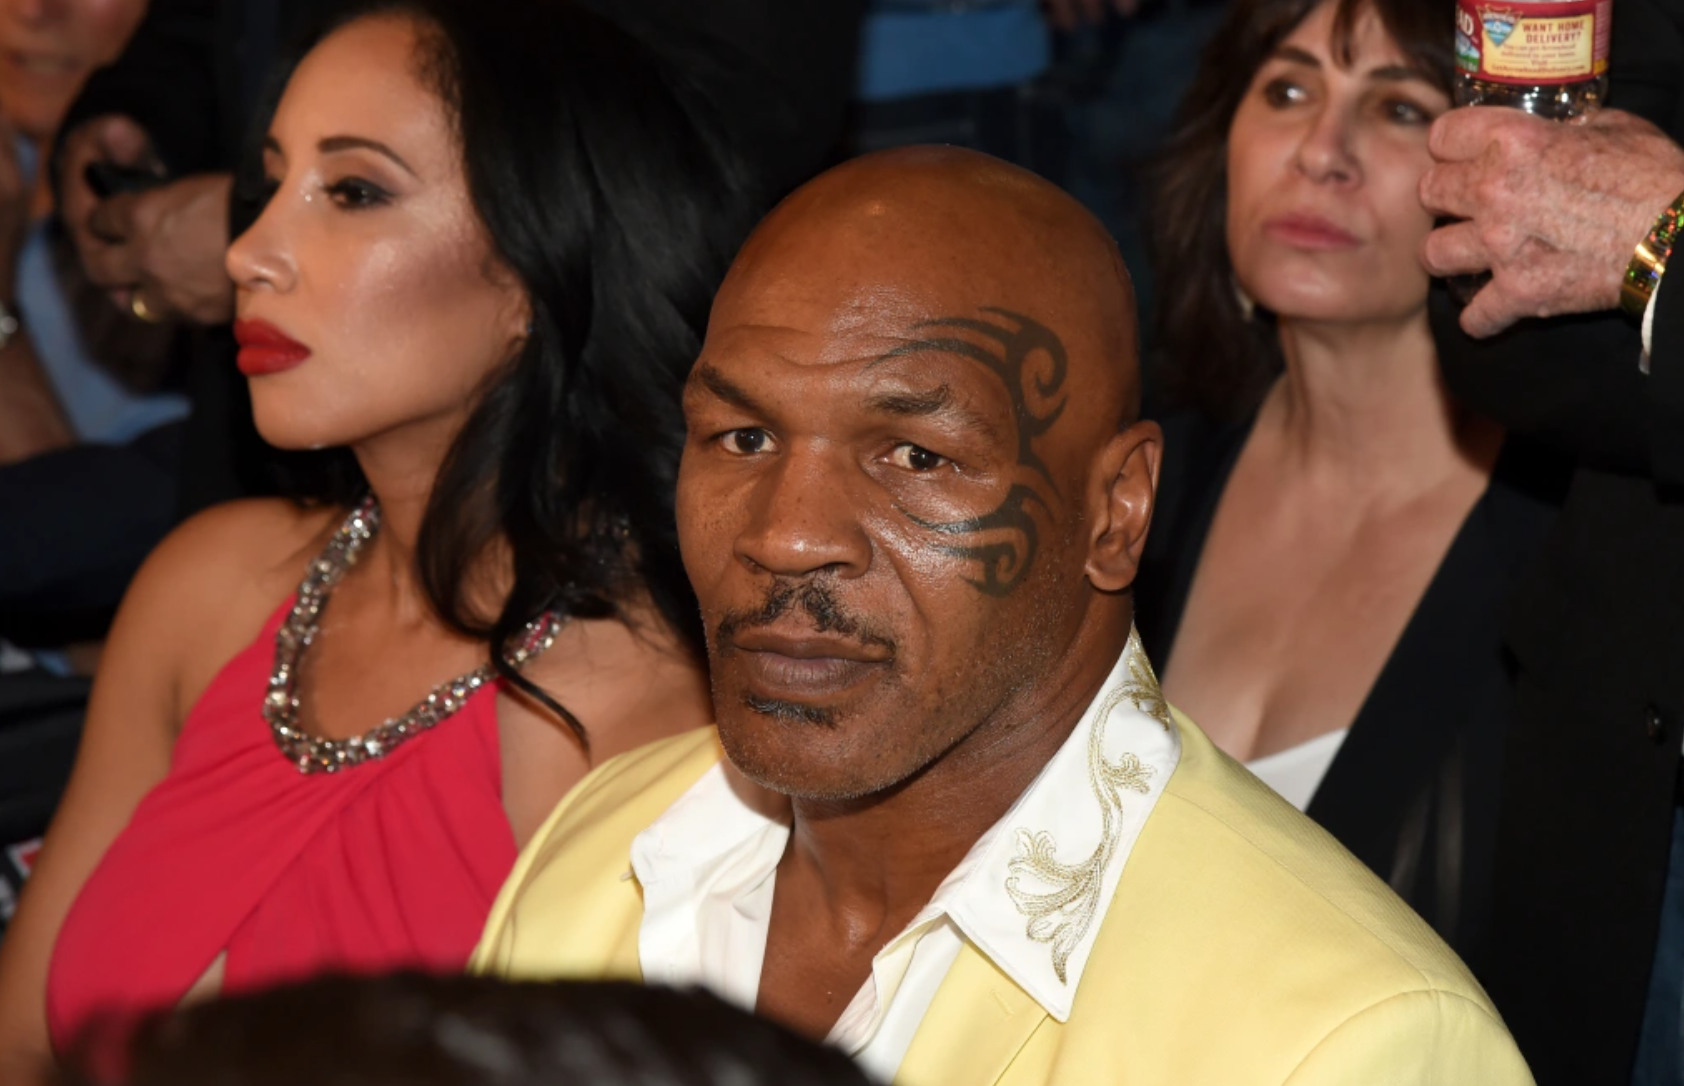 Mike Tyson Accused Of Raping Woman In 1990, Sued For $5M